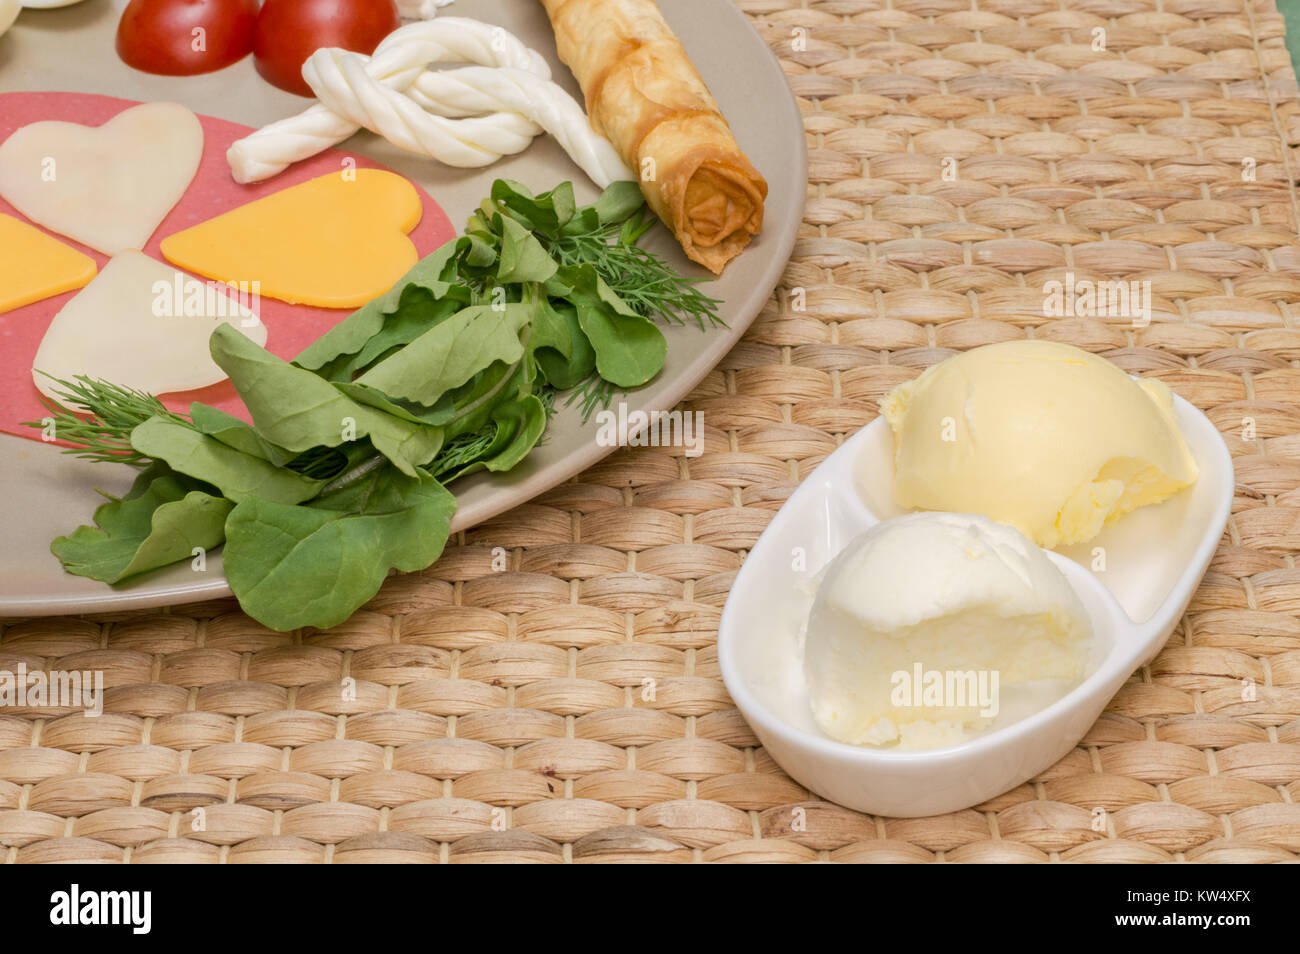 Close up of traditional Turkish breakfast served on porcelain plate with  cheese, salami, patty, tomato, and rockets Stock Photo